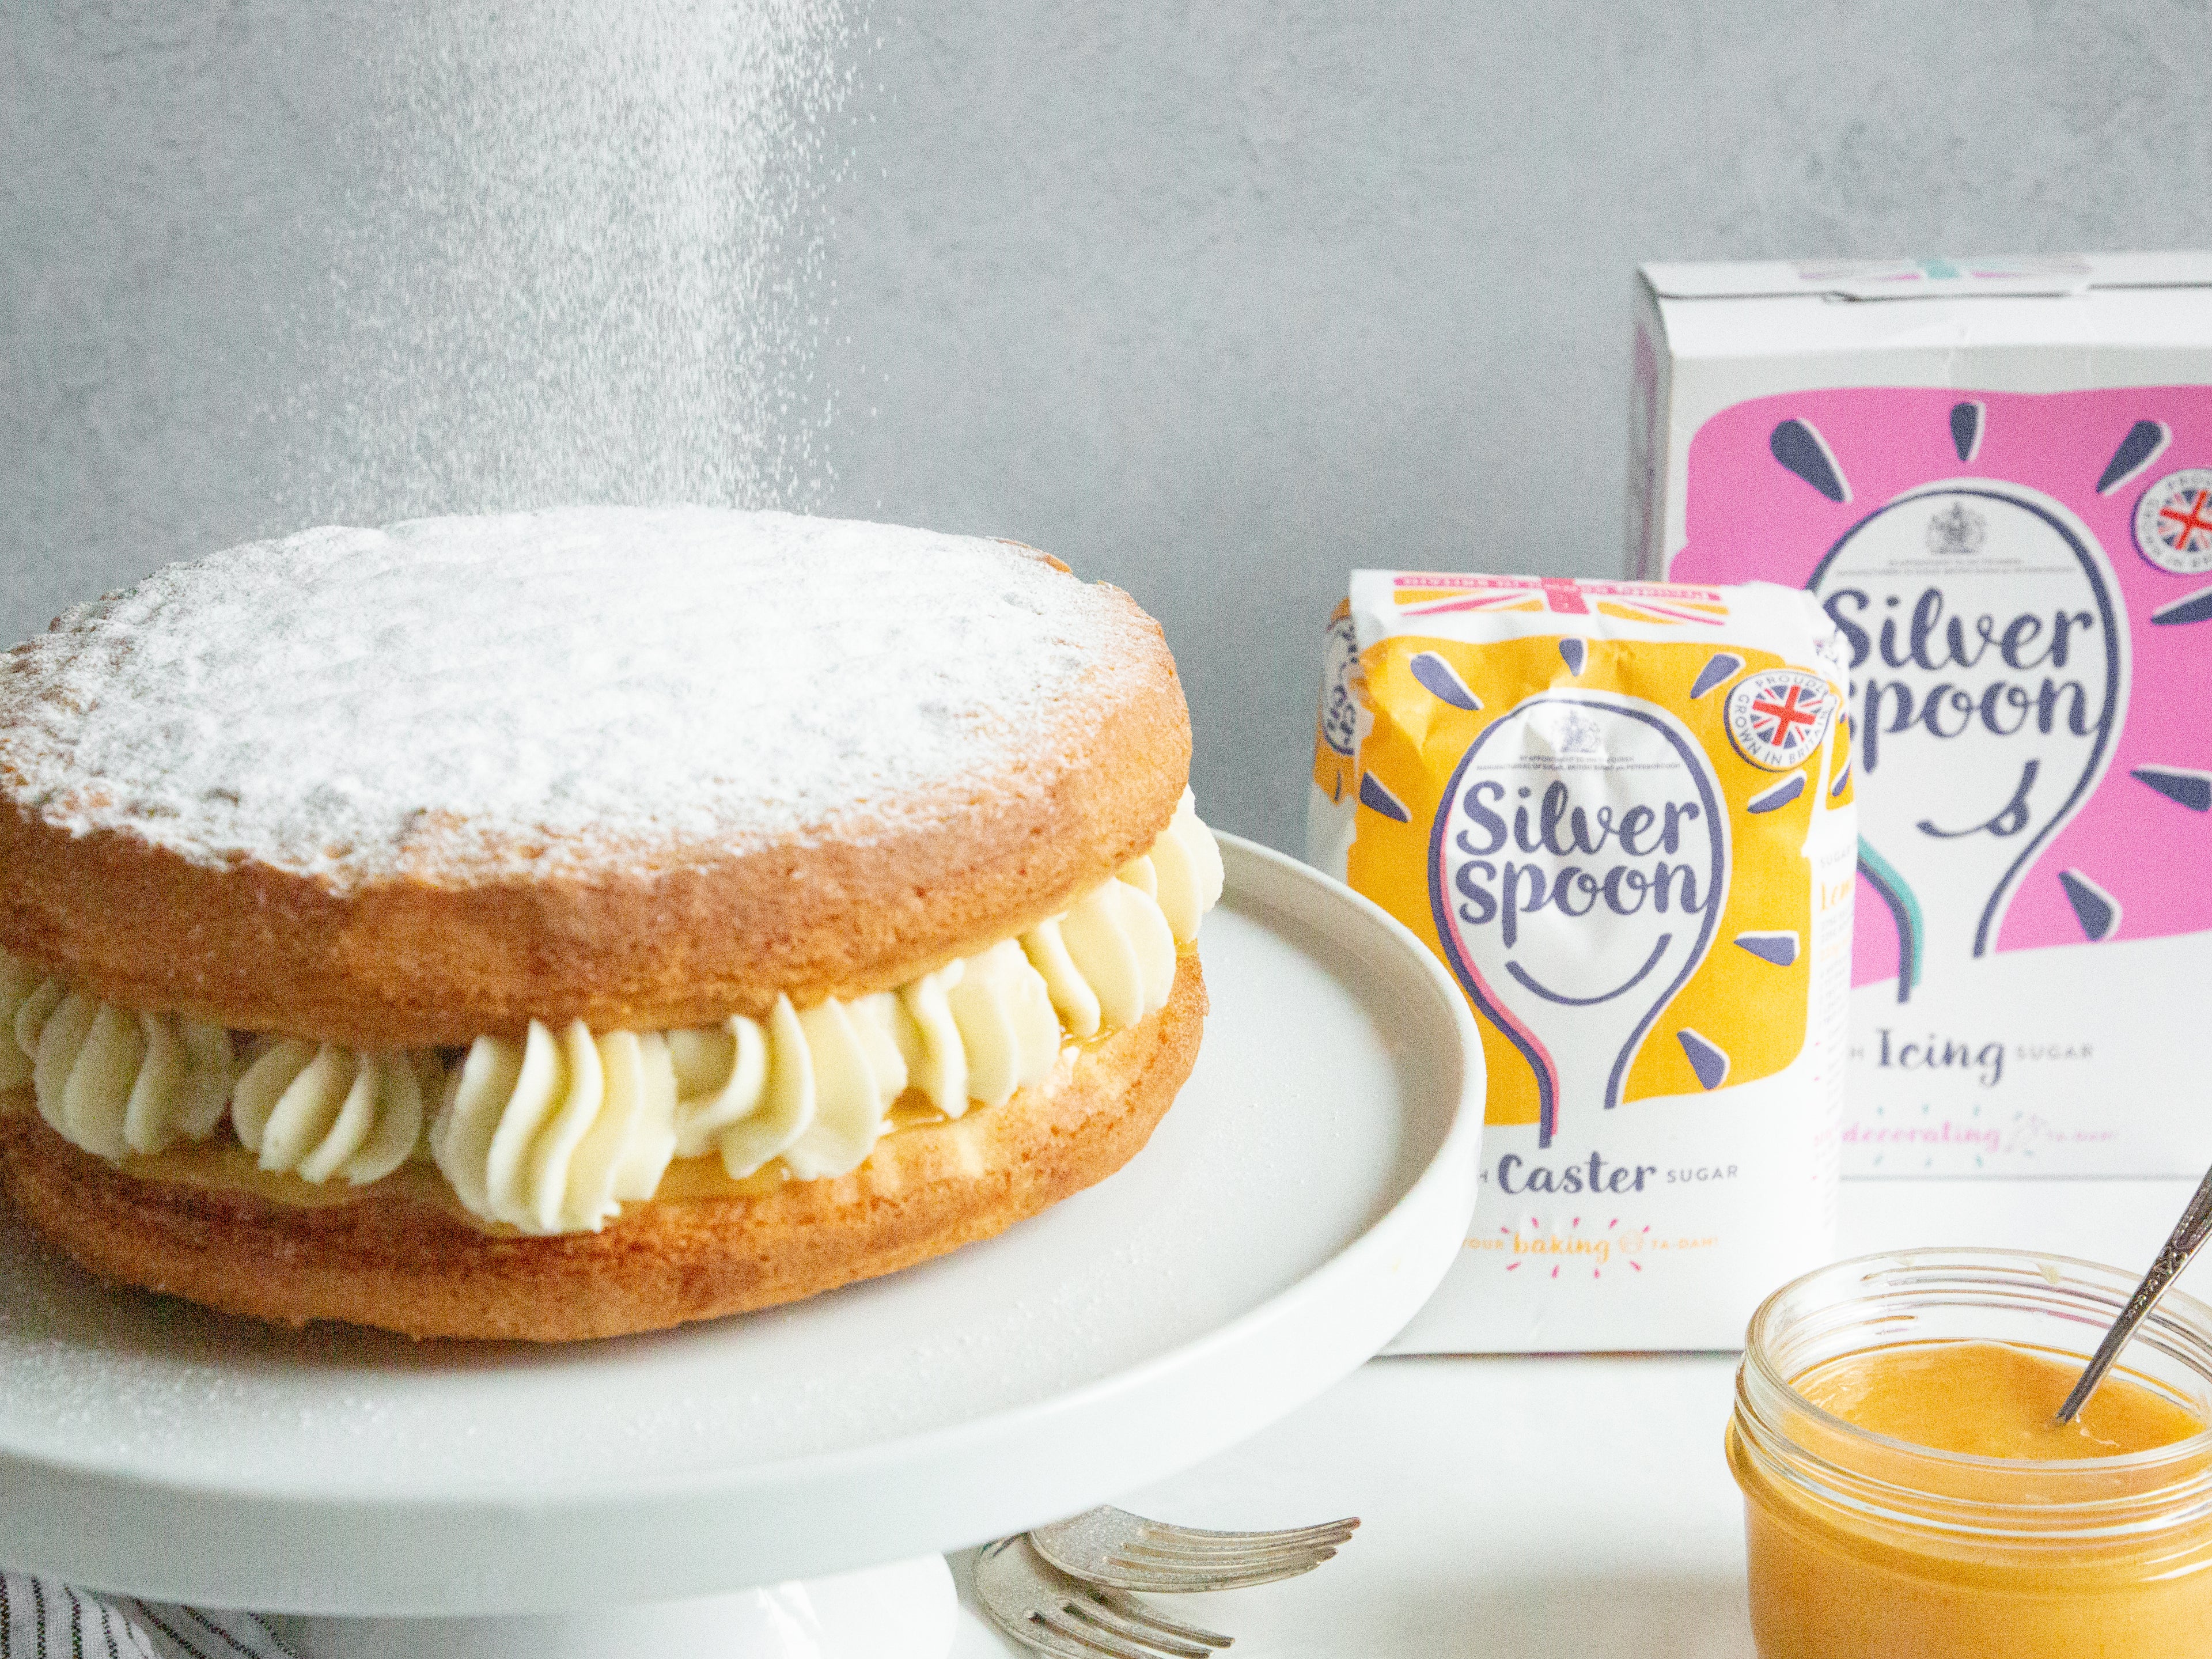 Classic Lemon Cake dusted with Silver Spoon Icing Sugar, next to a box of Silver Spoon Caster Sugar and Icing Sugar